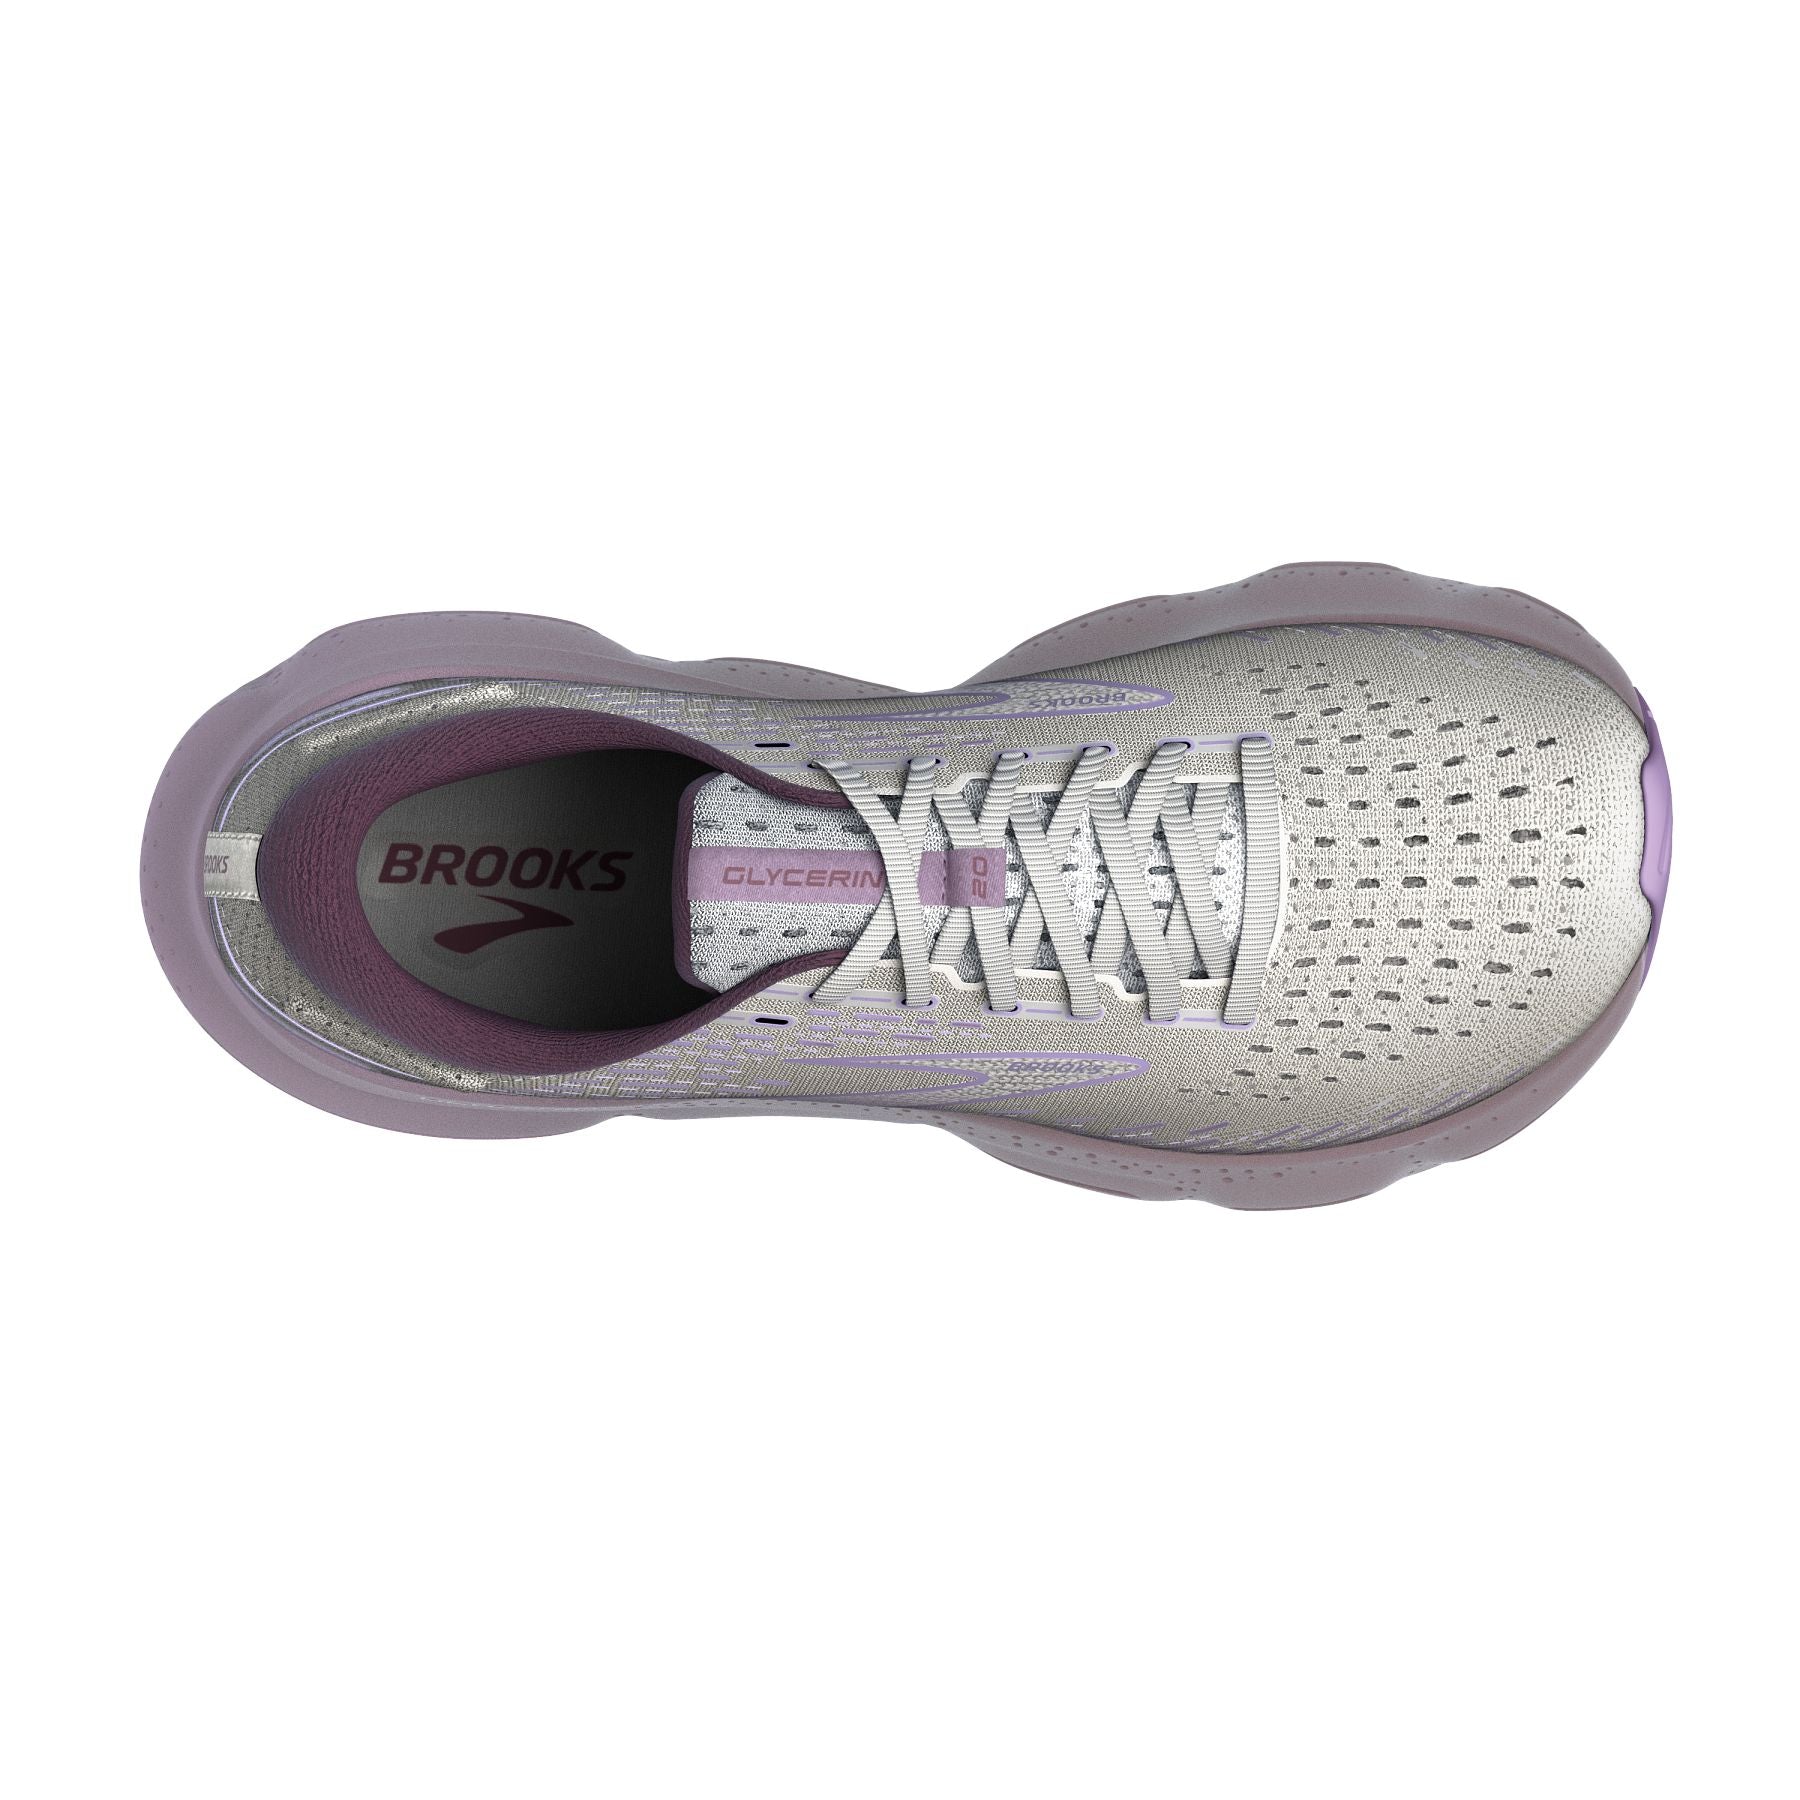 Top view of the Women's Glycerin 20 by Brooks in the color White/Orchid Lavender